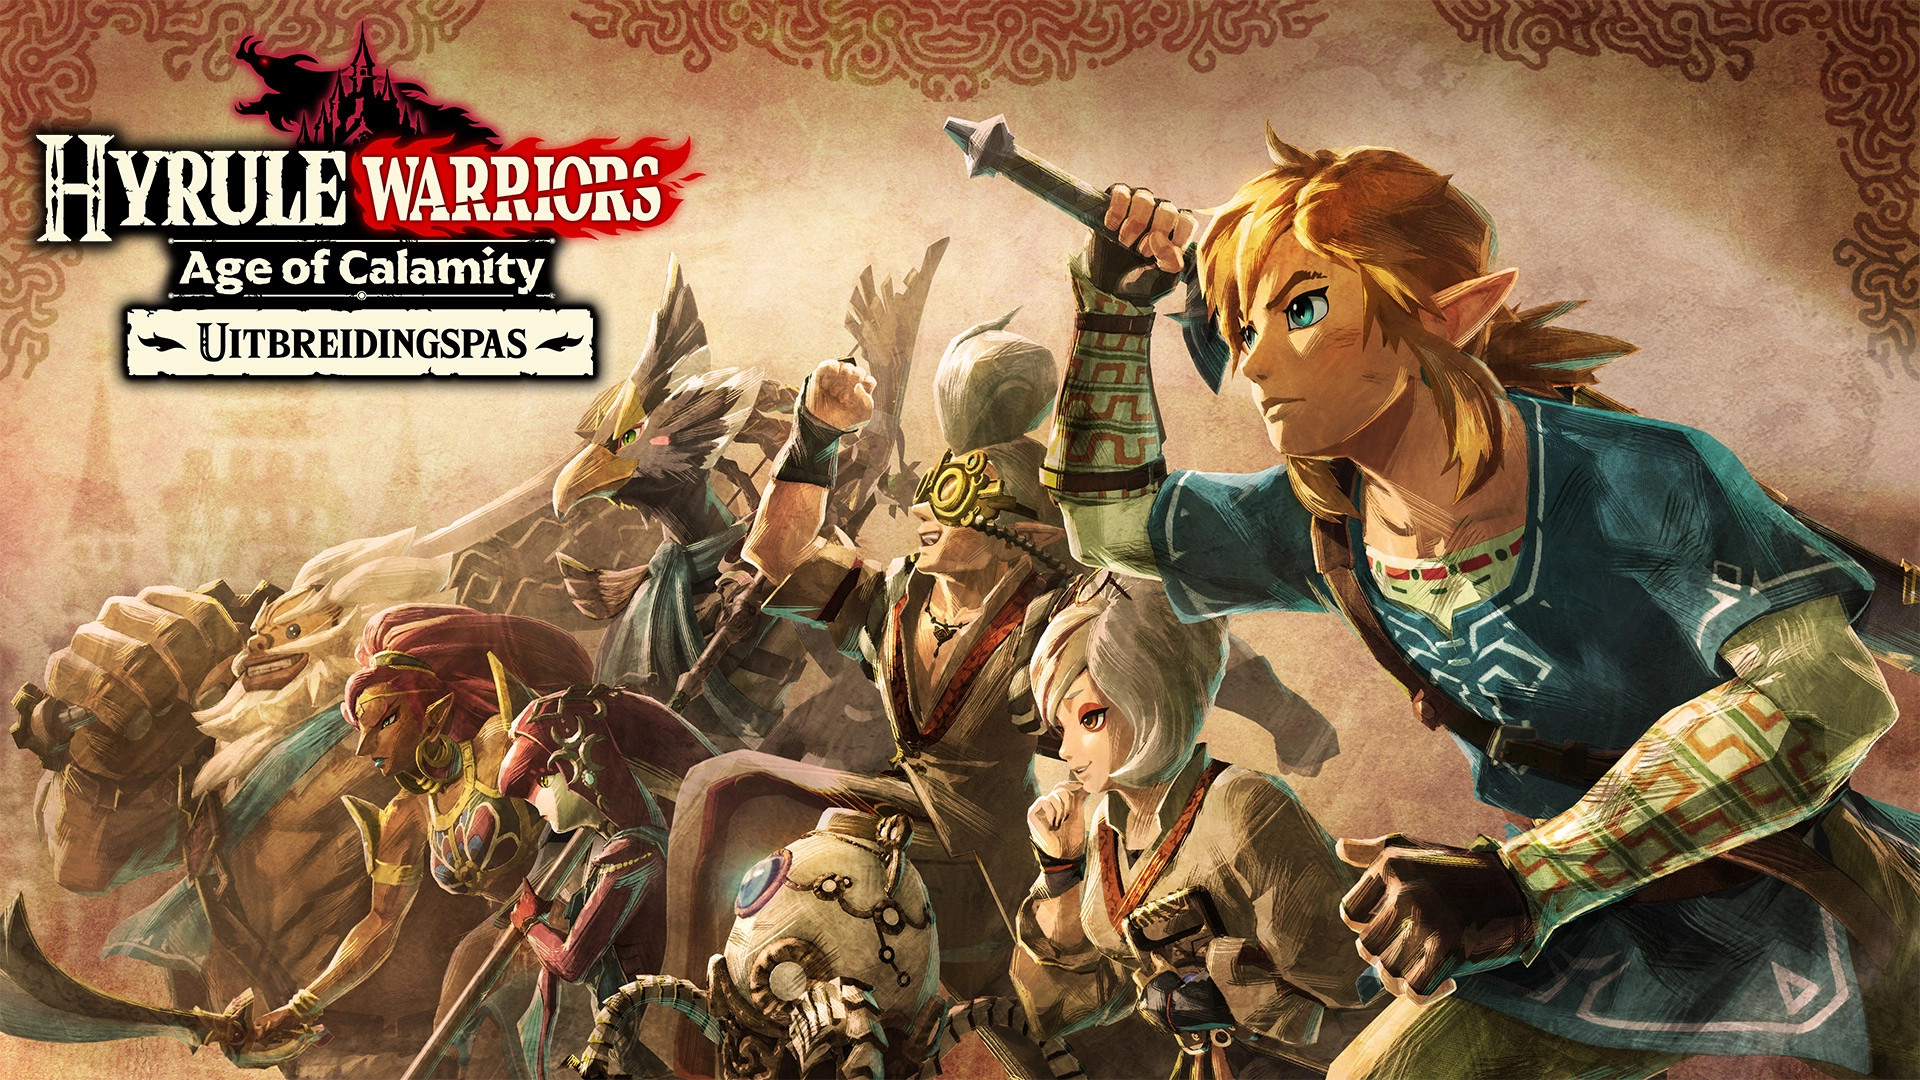 Nintendo AOC Hyrule Warriors Age of Calamity Expansion Pass DLC (extra content)